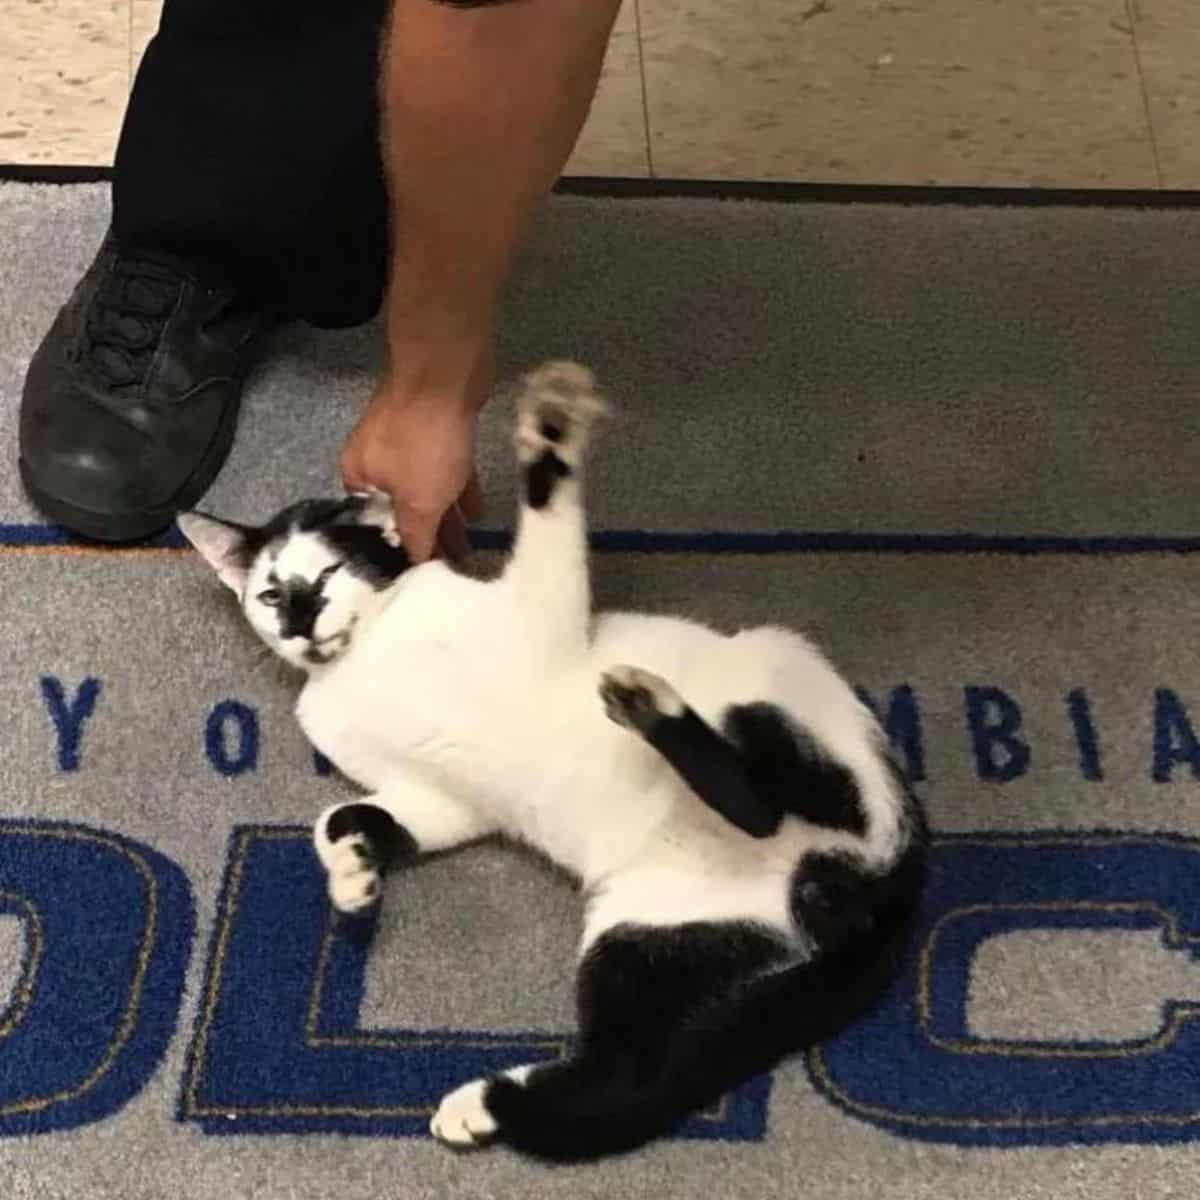 policeman petting a black and white cat